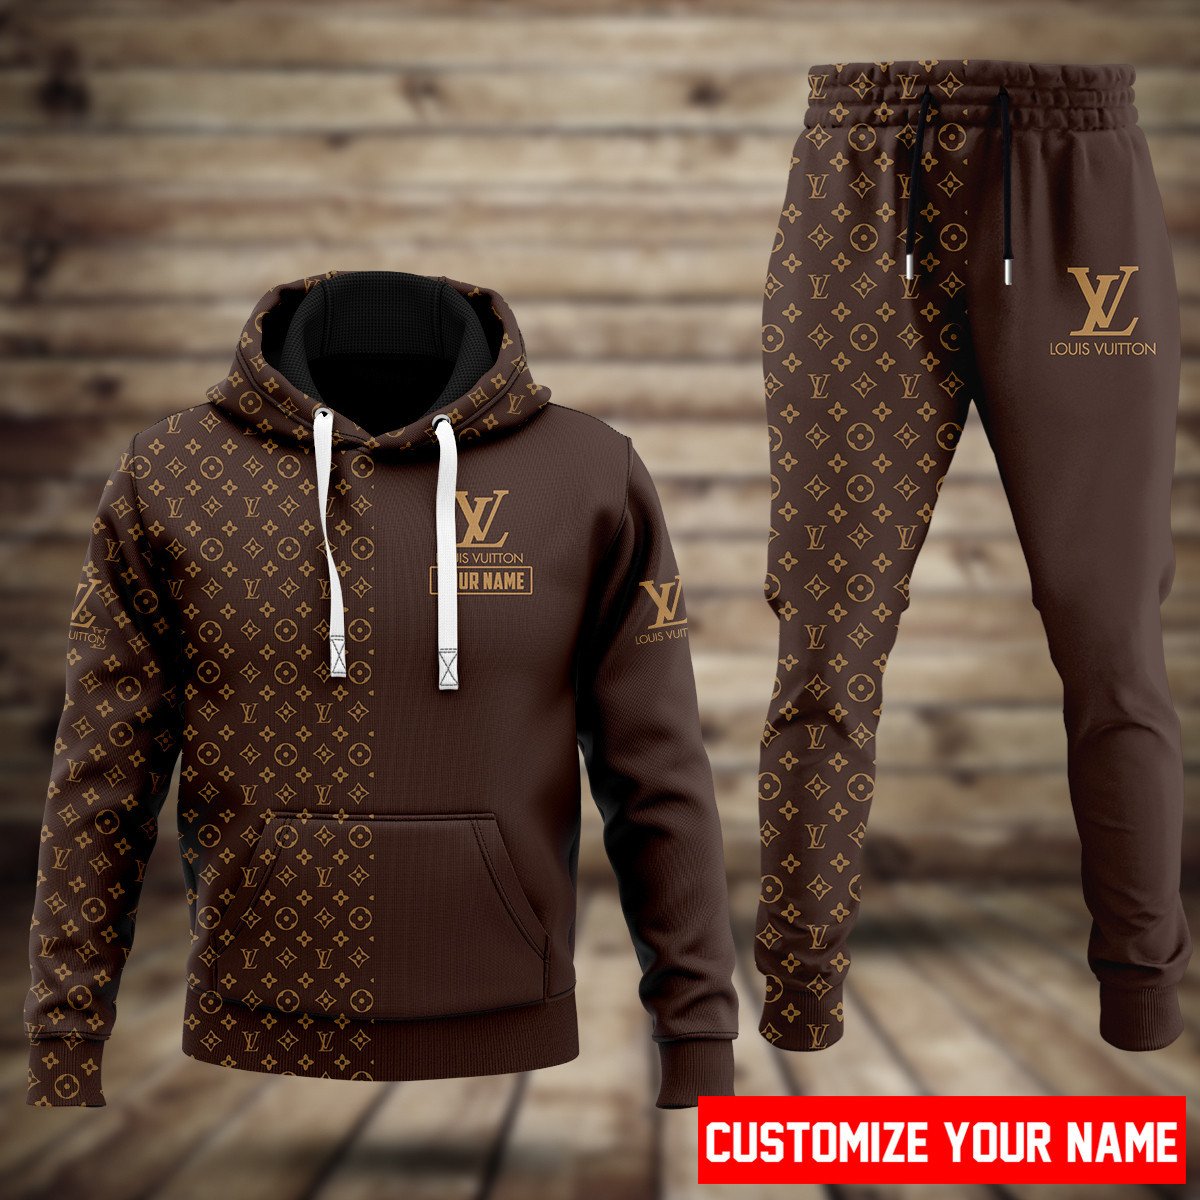 Louis Vuitton Tank Top Leggings LV Luxury Clothing Clothes Outfit